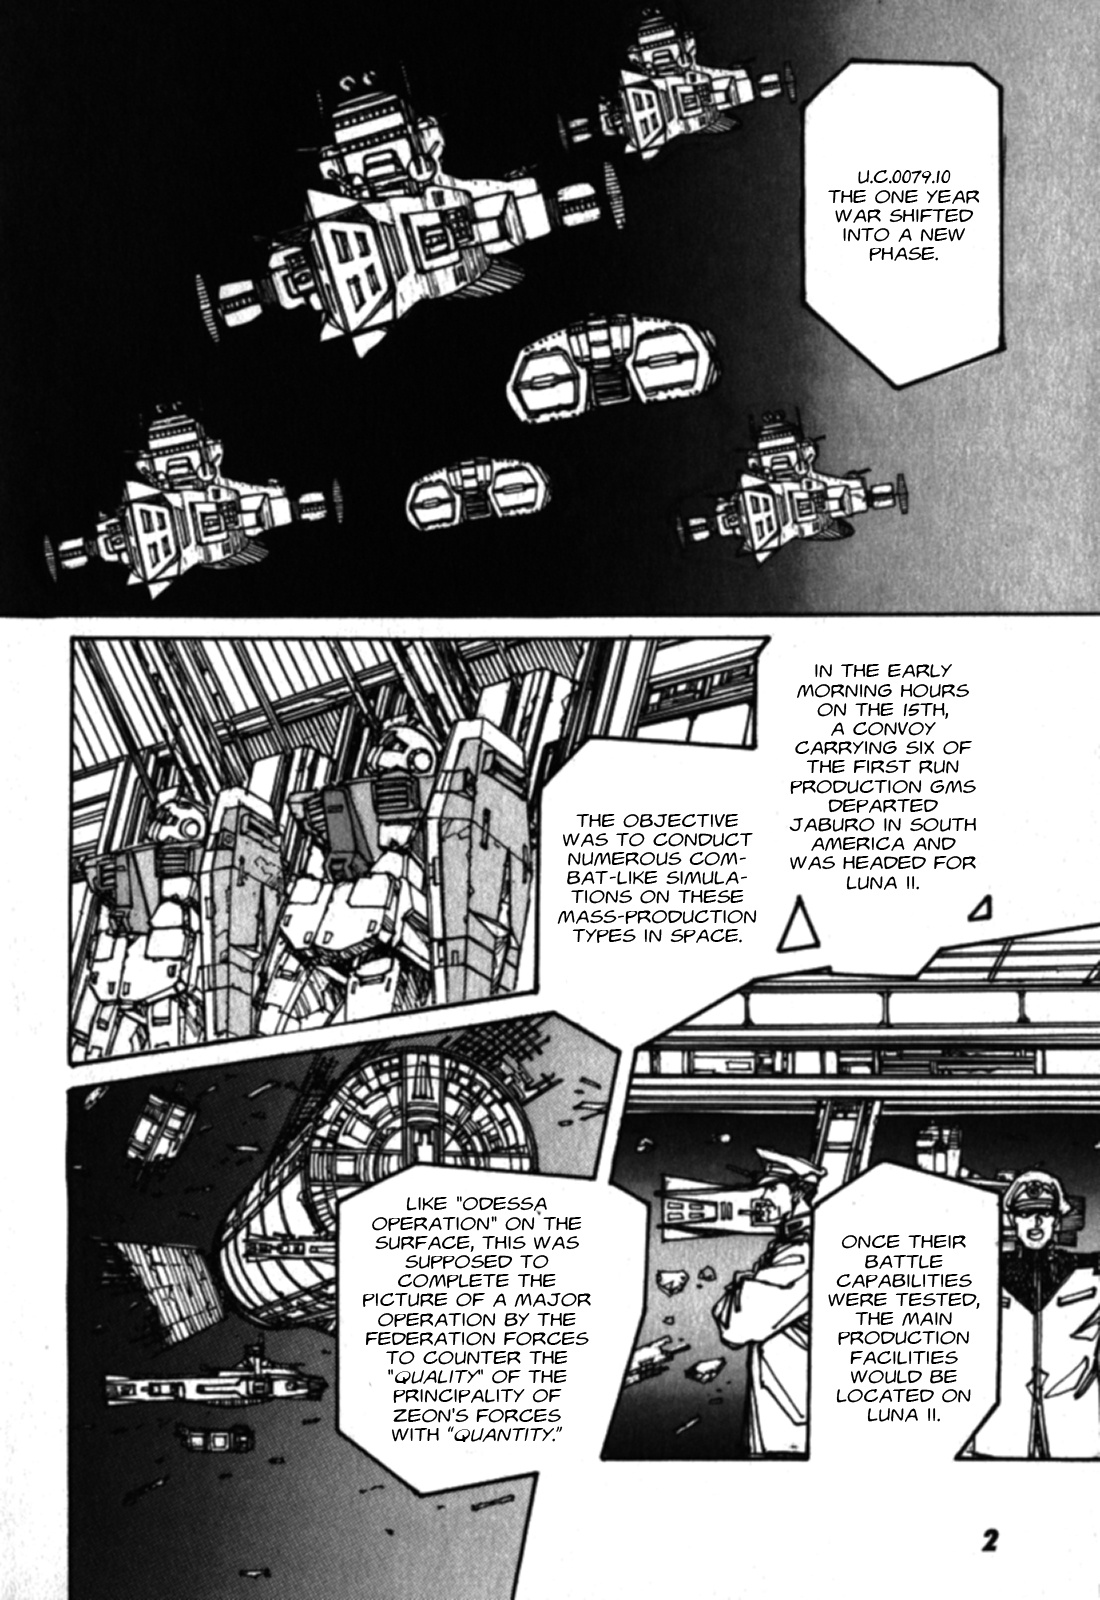 Gundam Pilot Series Of Biographies - The Brave Soldiers In The Sky Vol.1 Chapter 1: Johnny Ridden - Picture 3